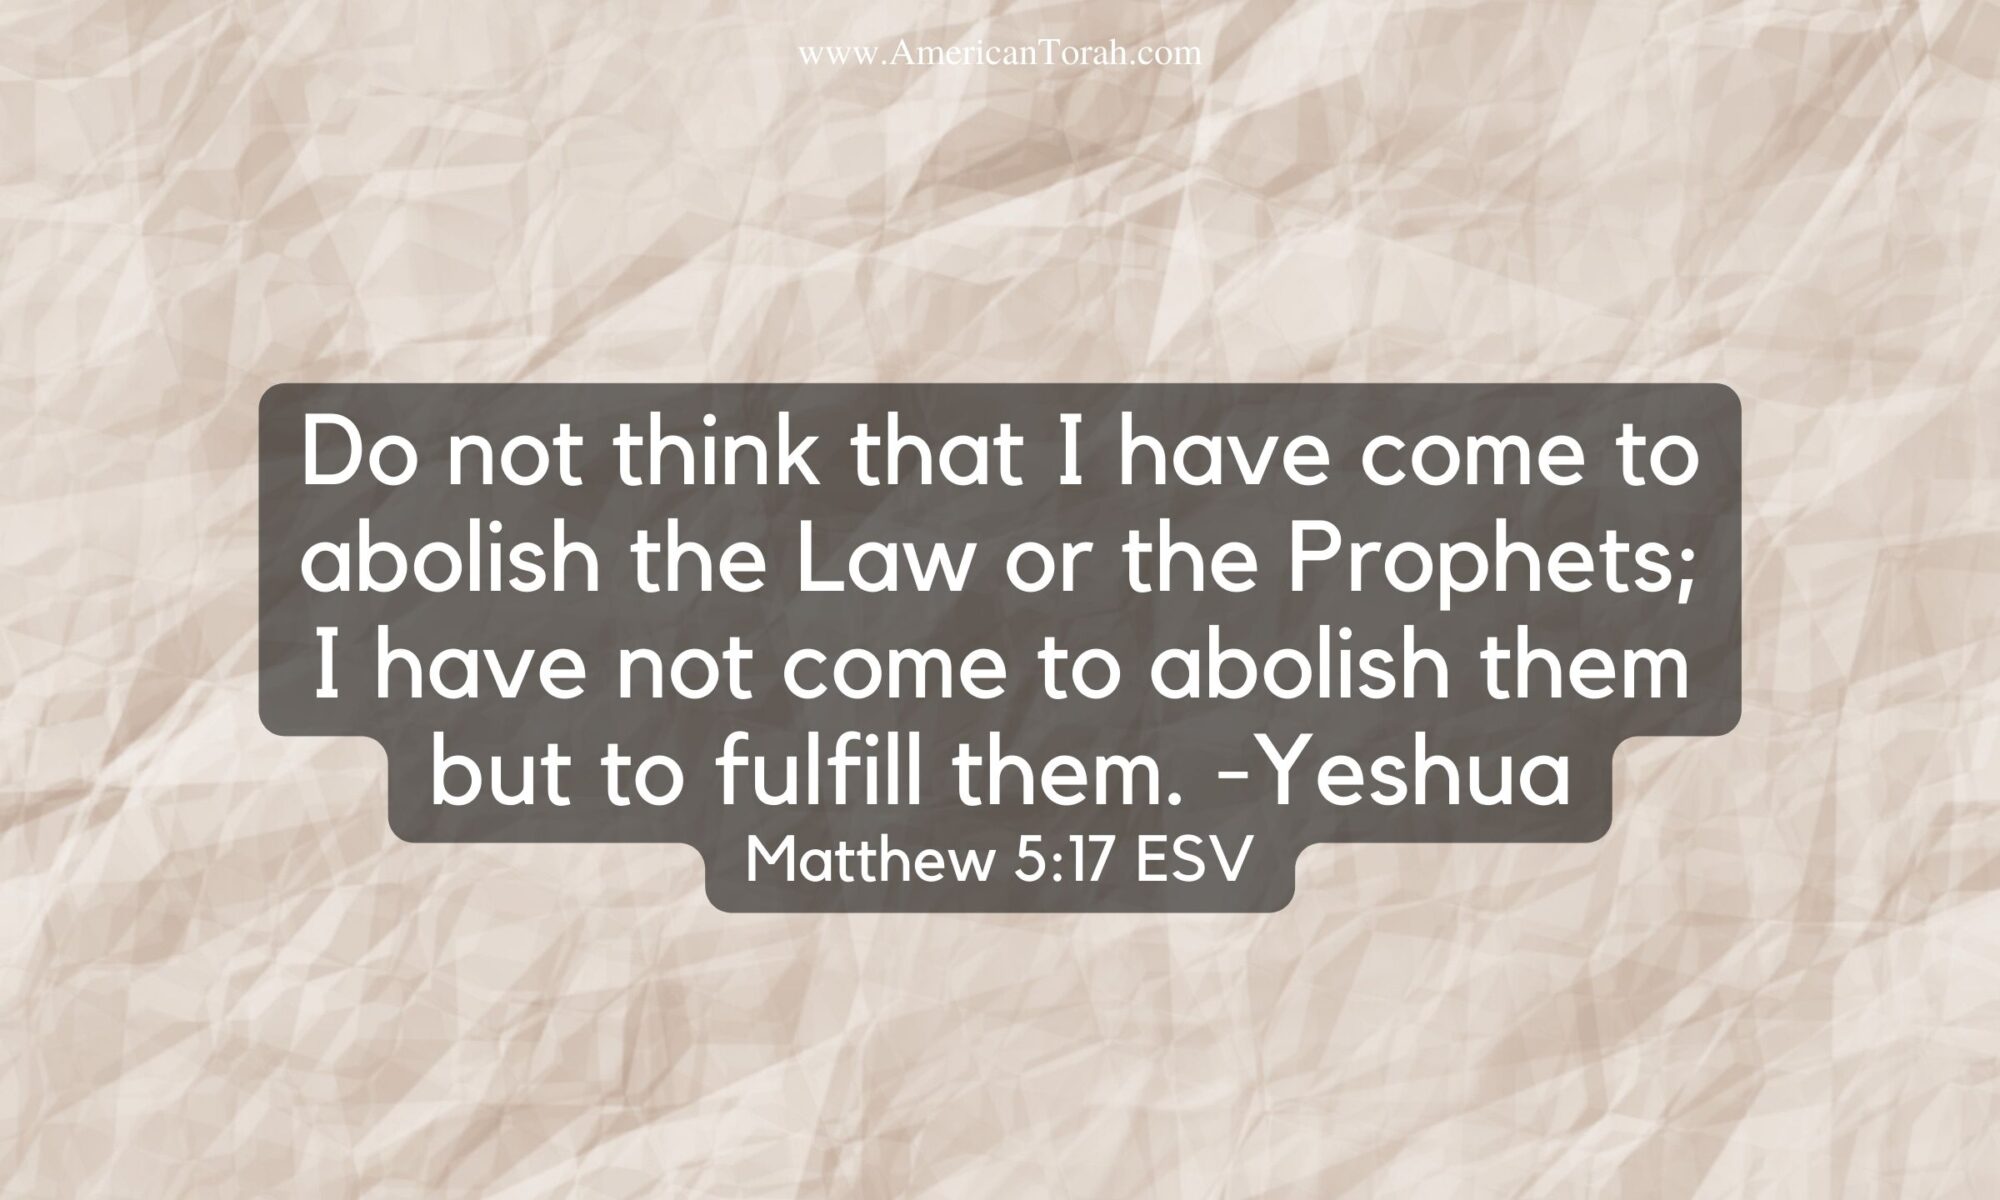 Do not think that I have come to abolish the Law or the Prophets; I have not come to abolish them but to fulfill them. For truly, I say to you, until heaven and earth pass away, not an iota, not a dot, will pass from the Law until all is accomplished. Matthew 5:17-18 ESV